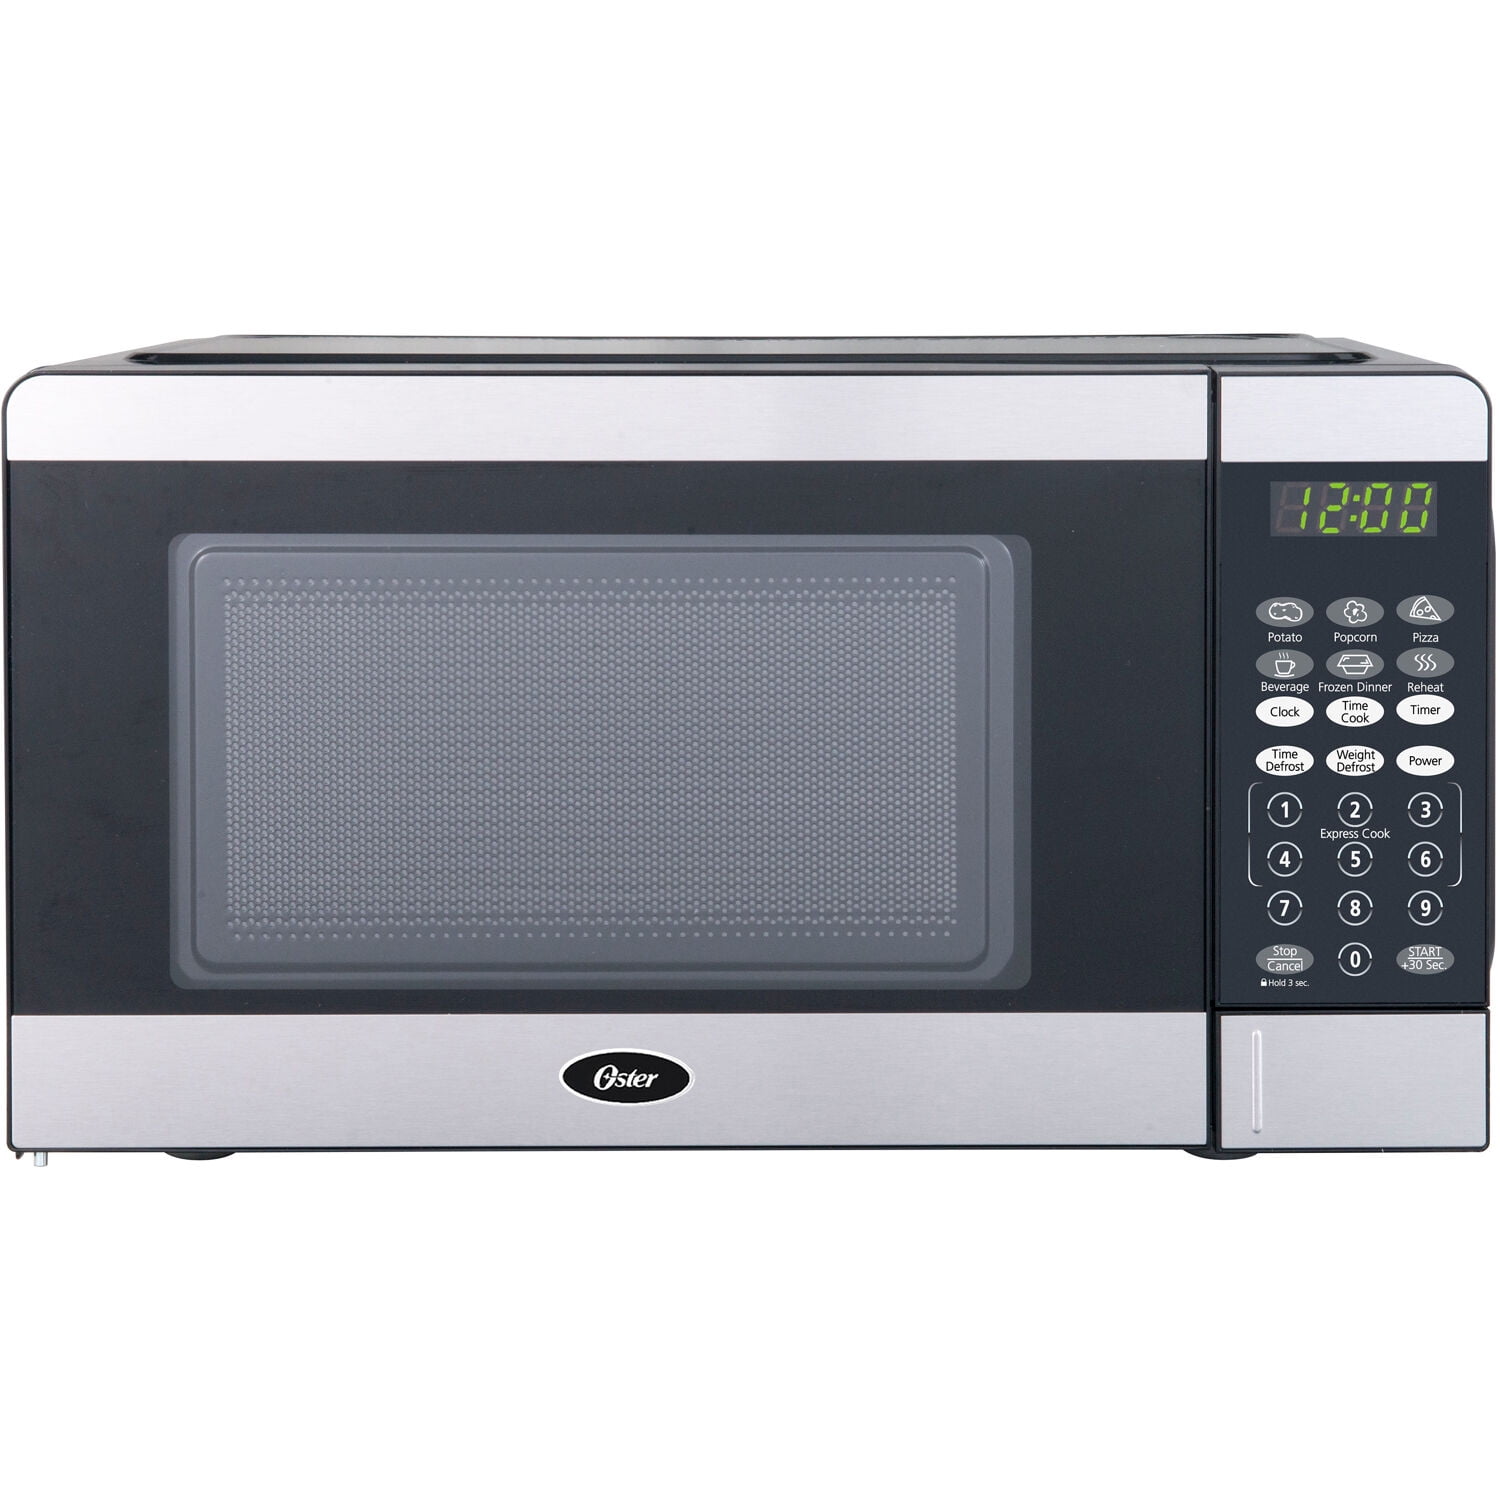 BUILT-IN 0.7 Cu. Ft. Deluxe Microwave Oven w/ Trim Kit - Stainless